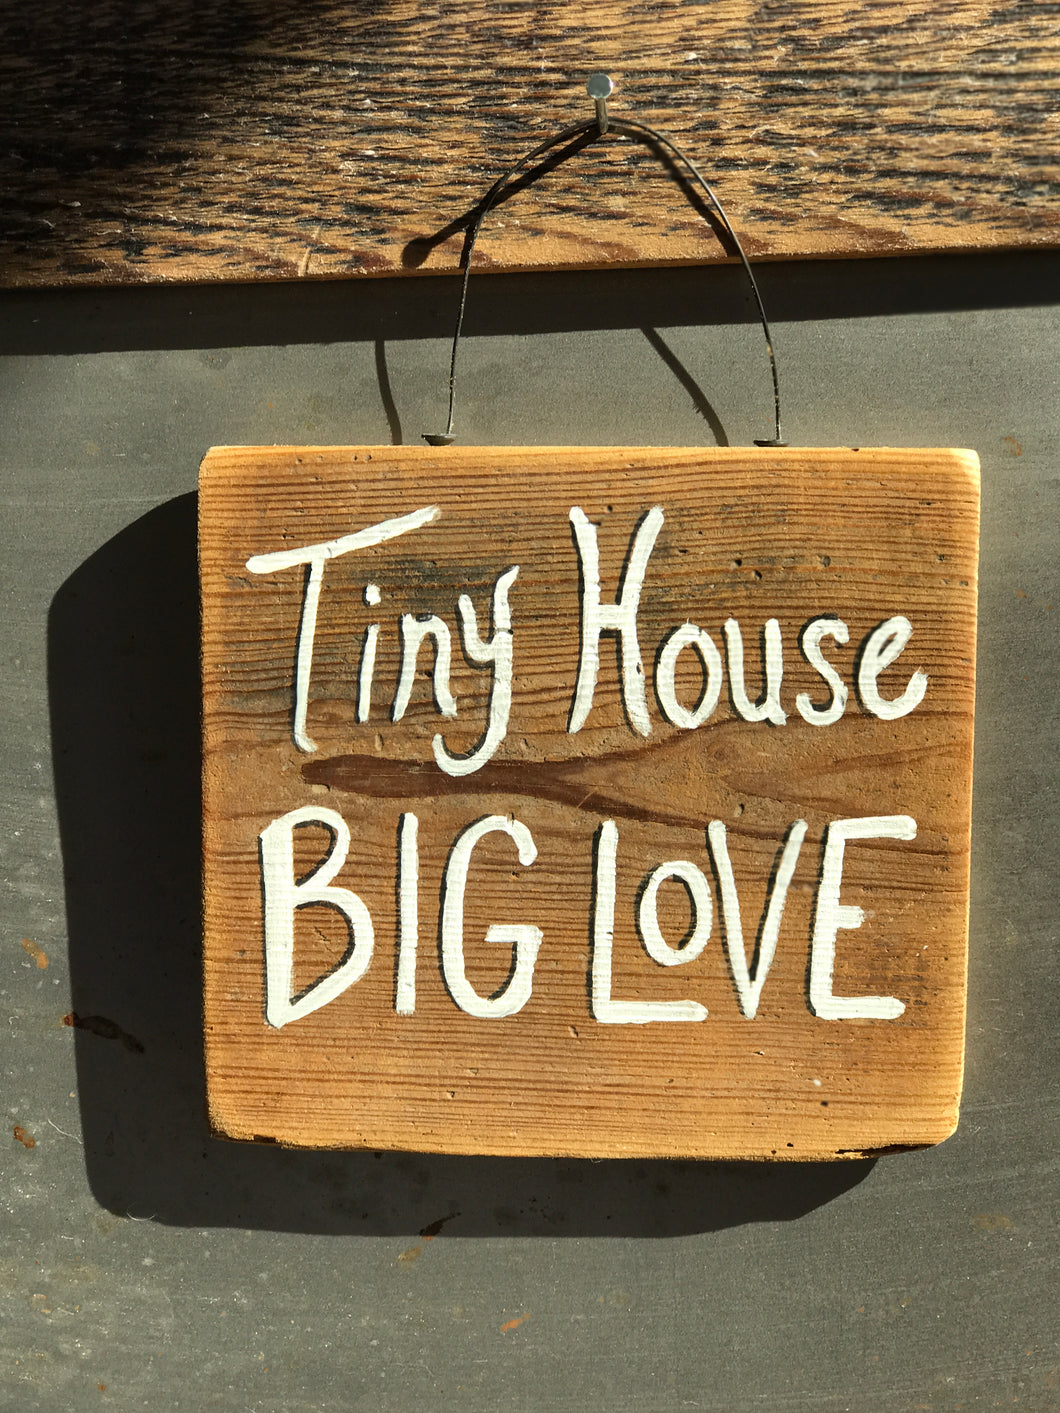 Tiny House Big Love / Upcycled Hand-painted Wood Sign